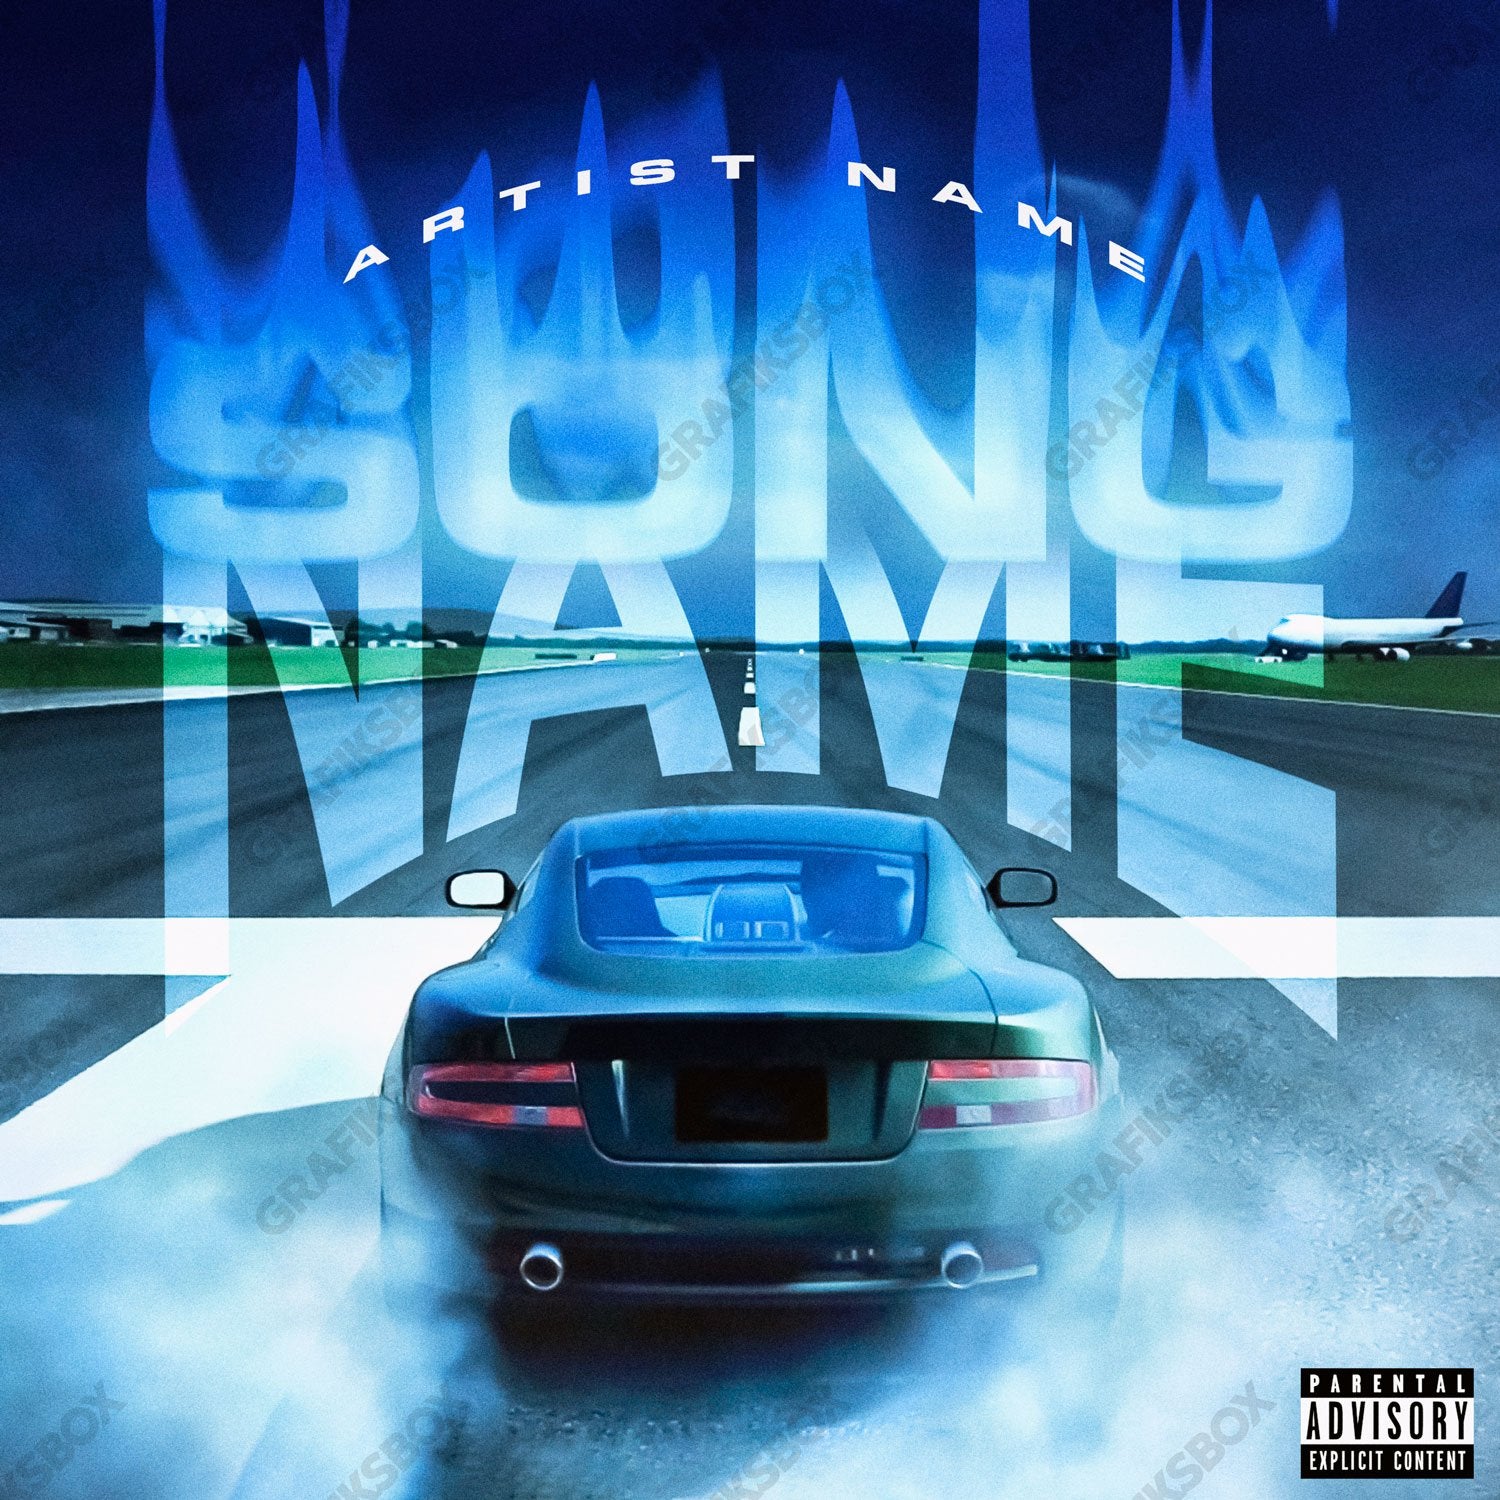 Fast Way premade cover art